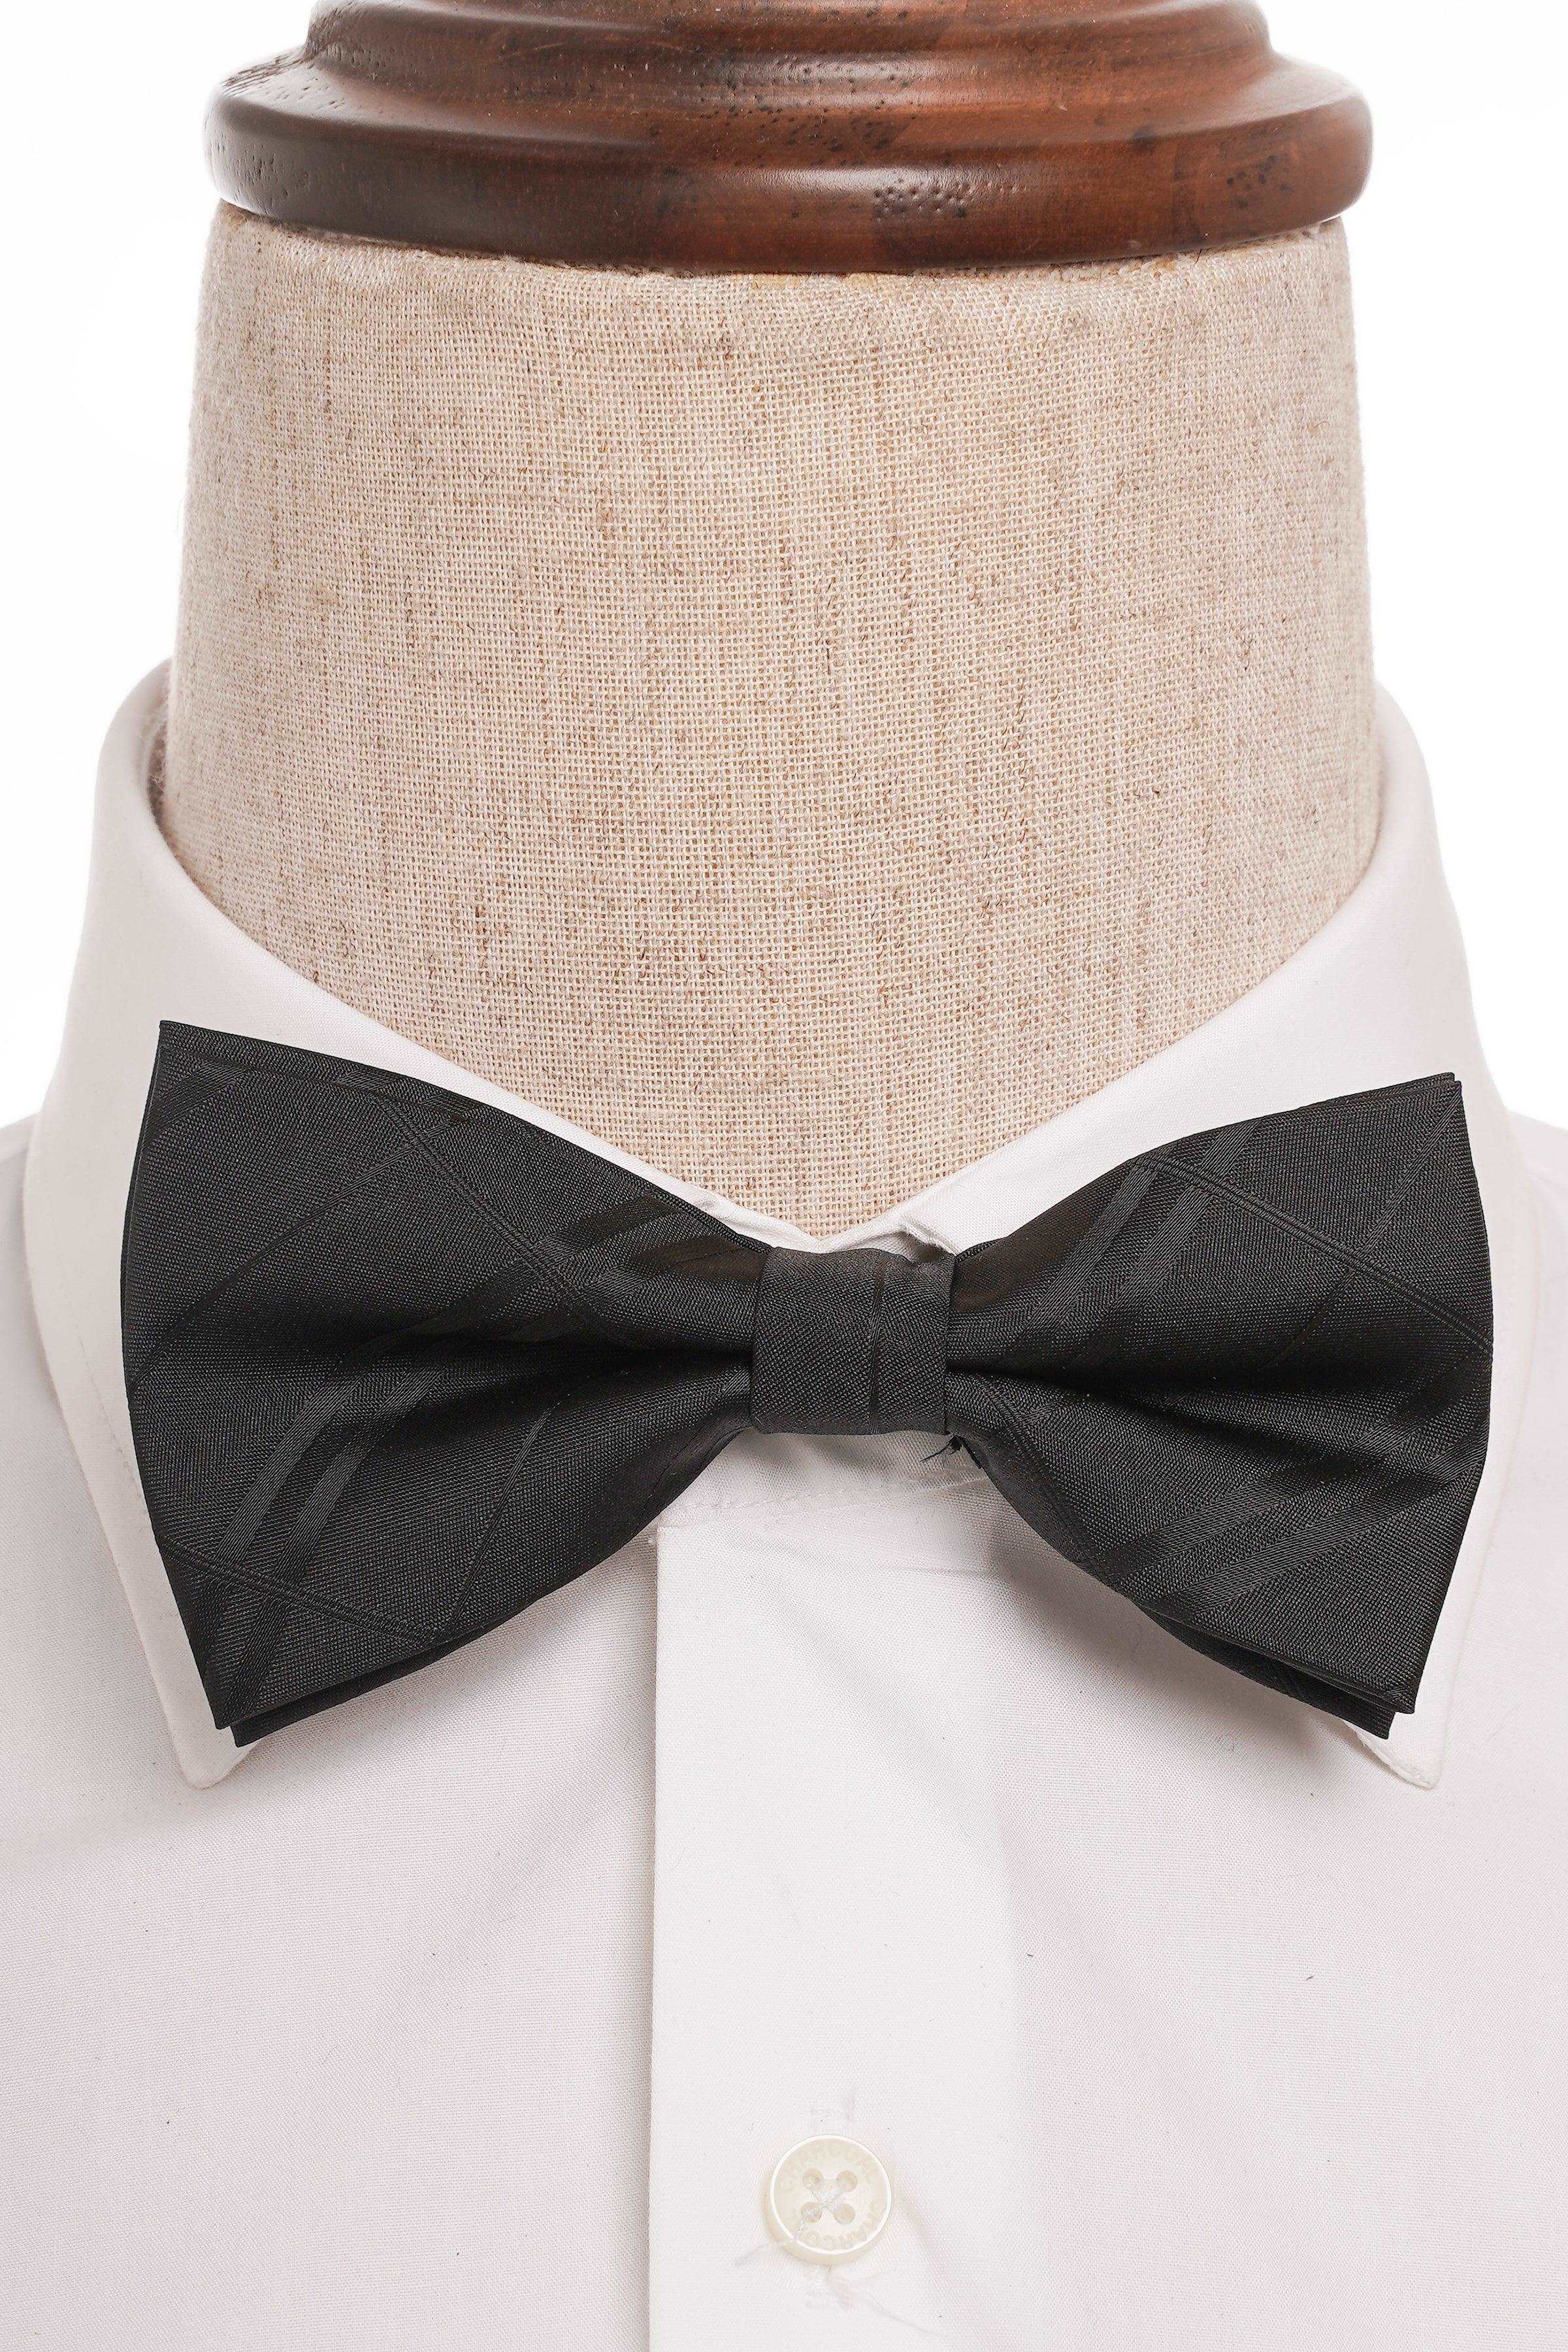 BOW TIE at Charcoal Clothing